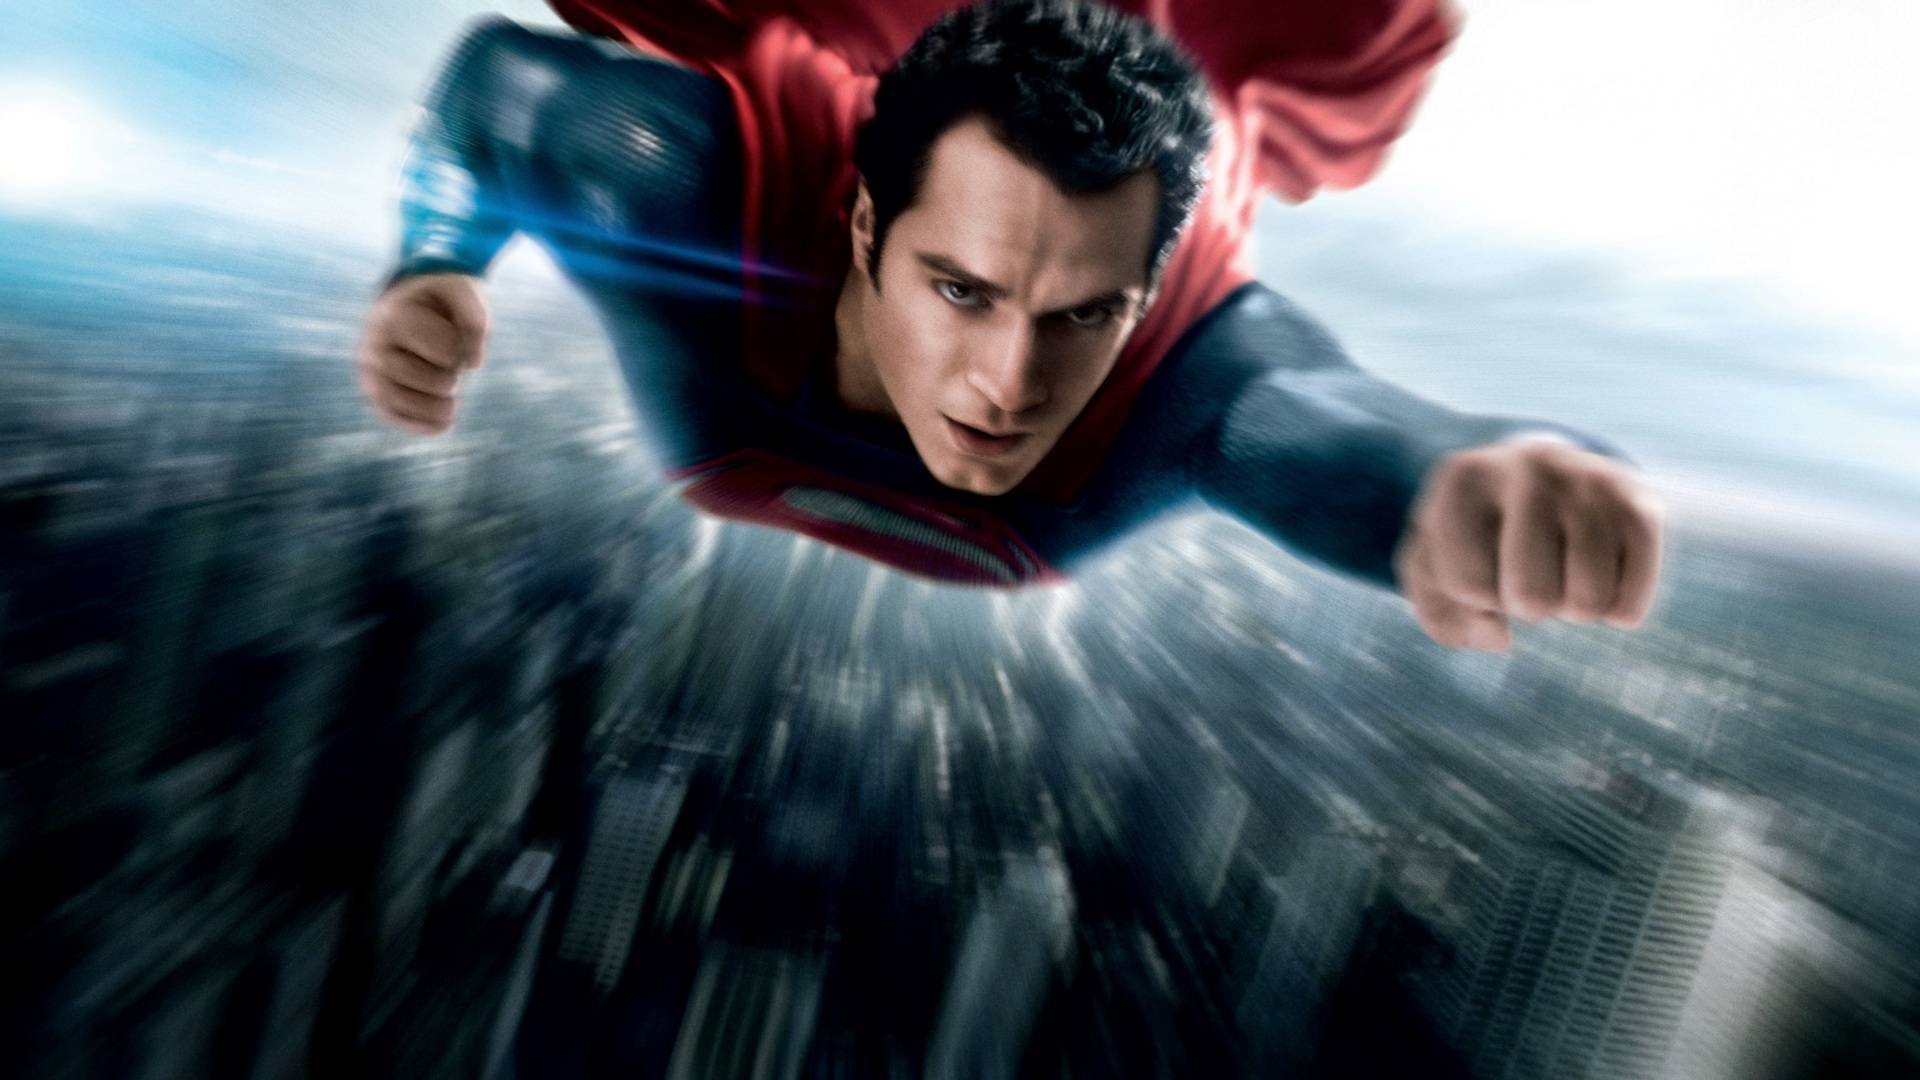 Awesome Man Of Steel Image Collection: Man Of Steel Wallpaper